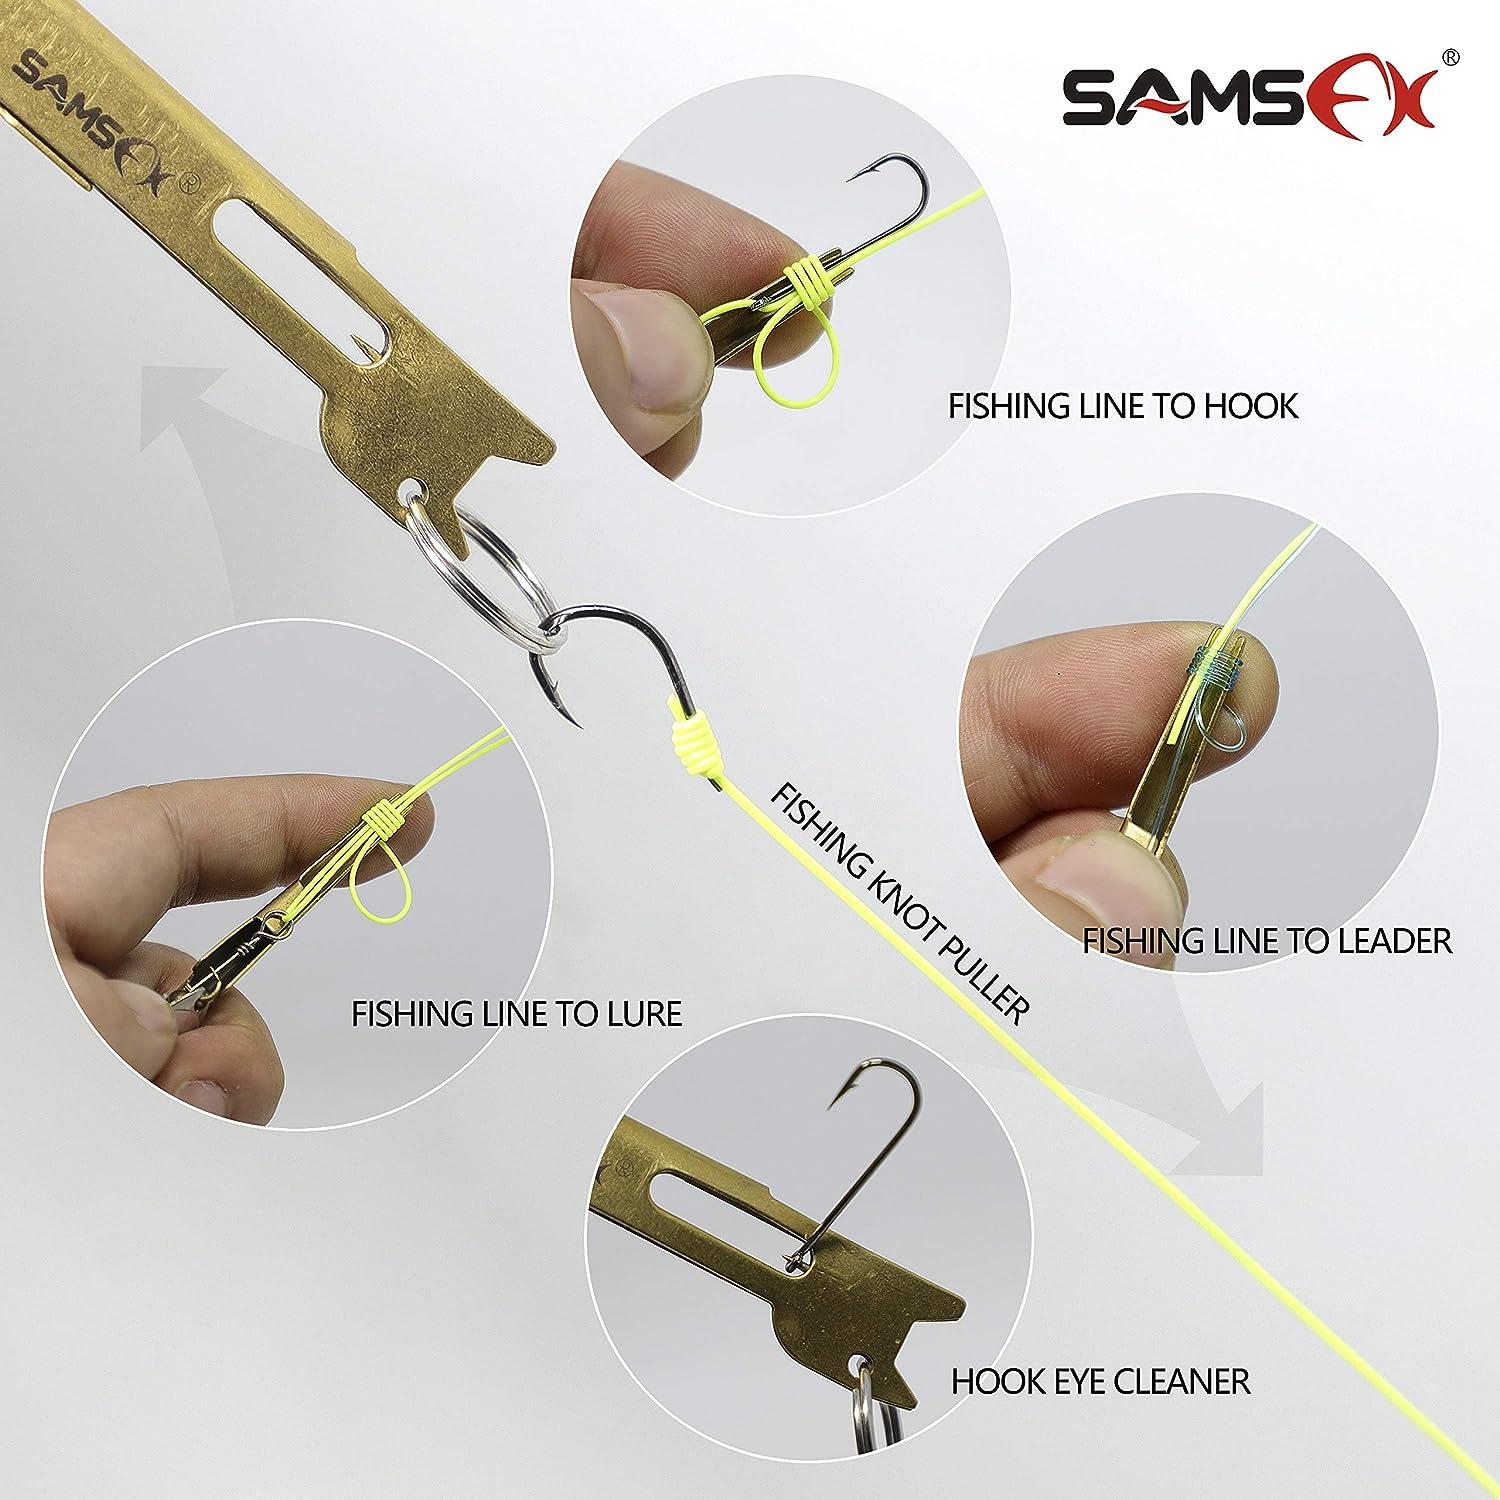 Important..‼ Hunters must have this skill. Fishing line knot puller tool 